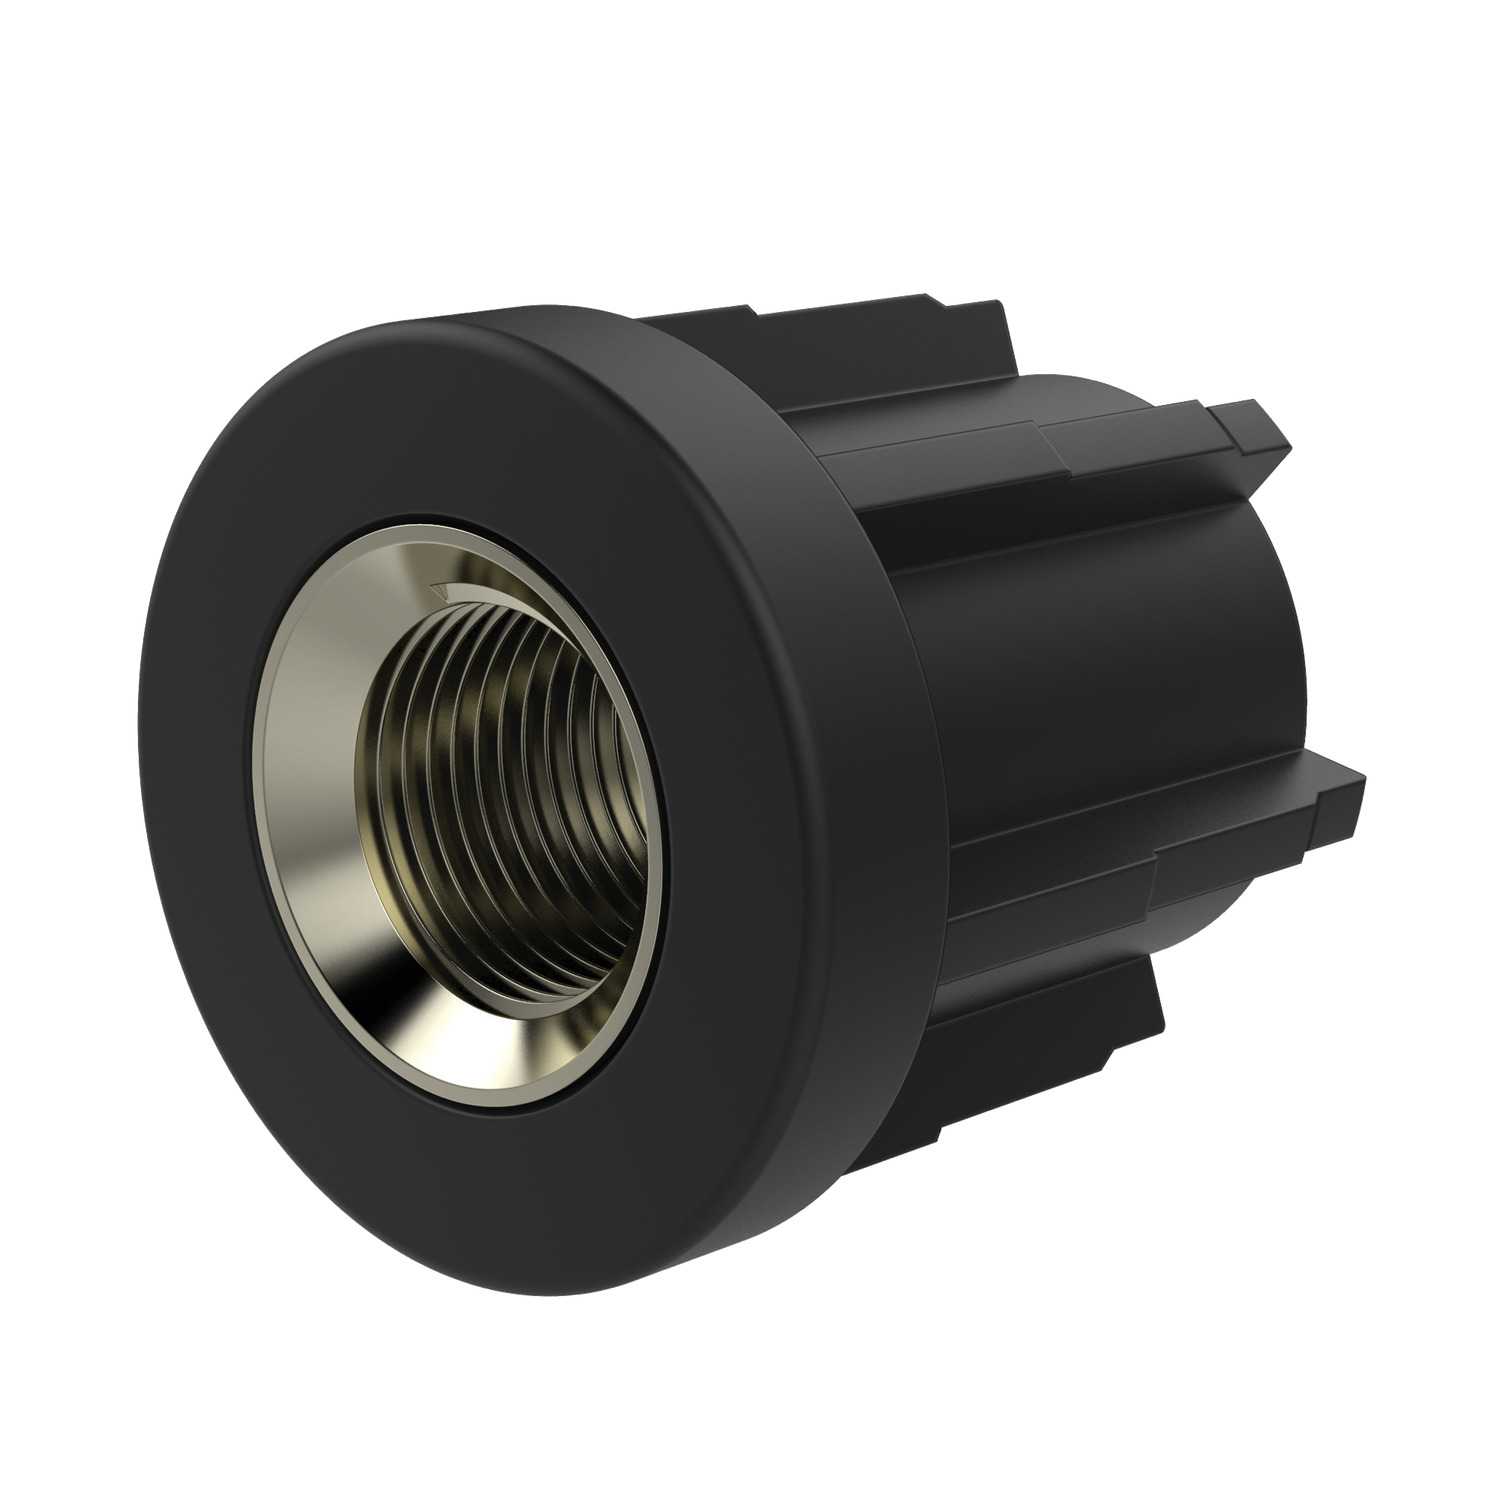 Threaded Plastic Insert - Round Reinforced polyamide round threaded insert with nickel plated brass bush, for use with levelling feet as a mounting insert. Stainless steel versions are available on request.